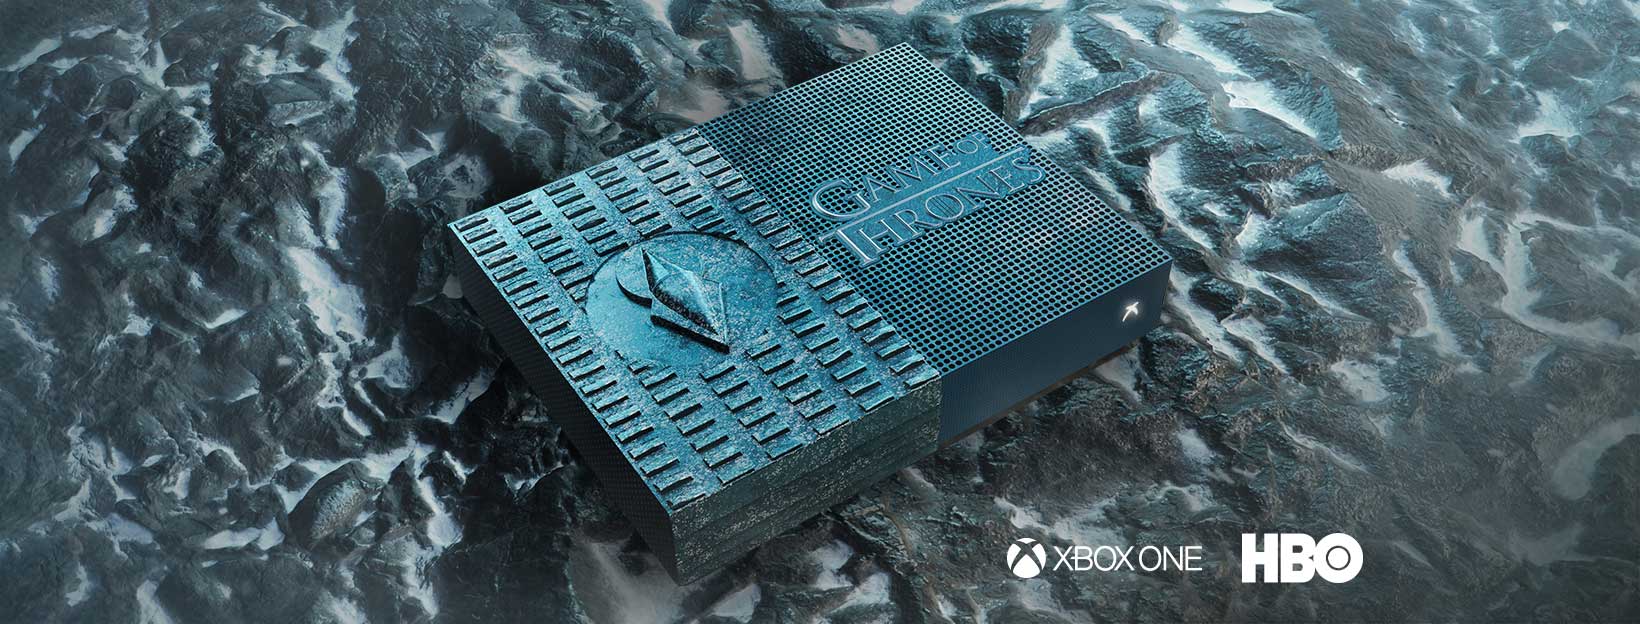 Game of Thrones Xbox One S Competition